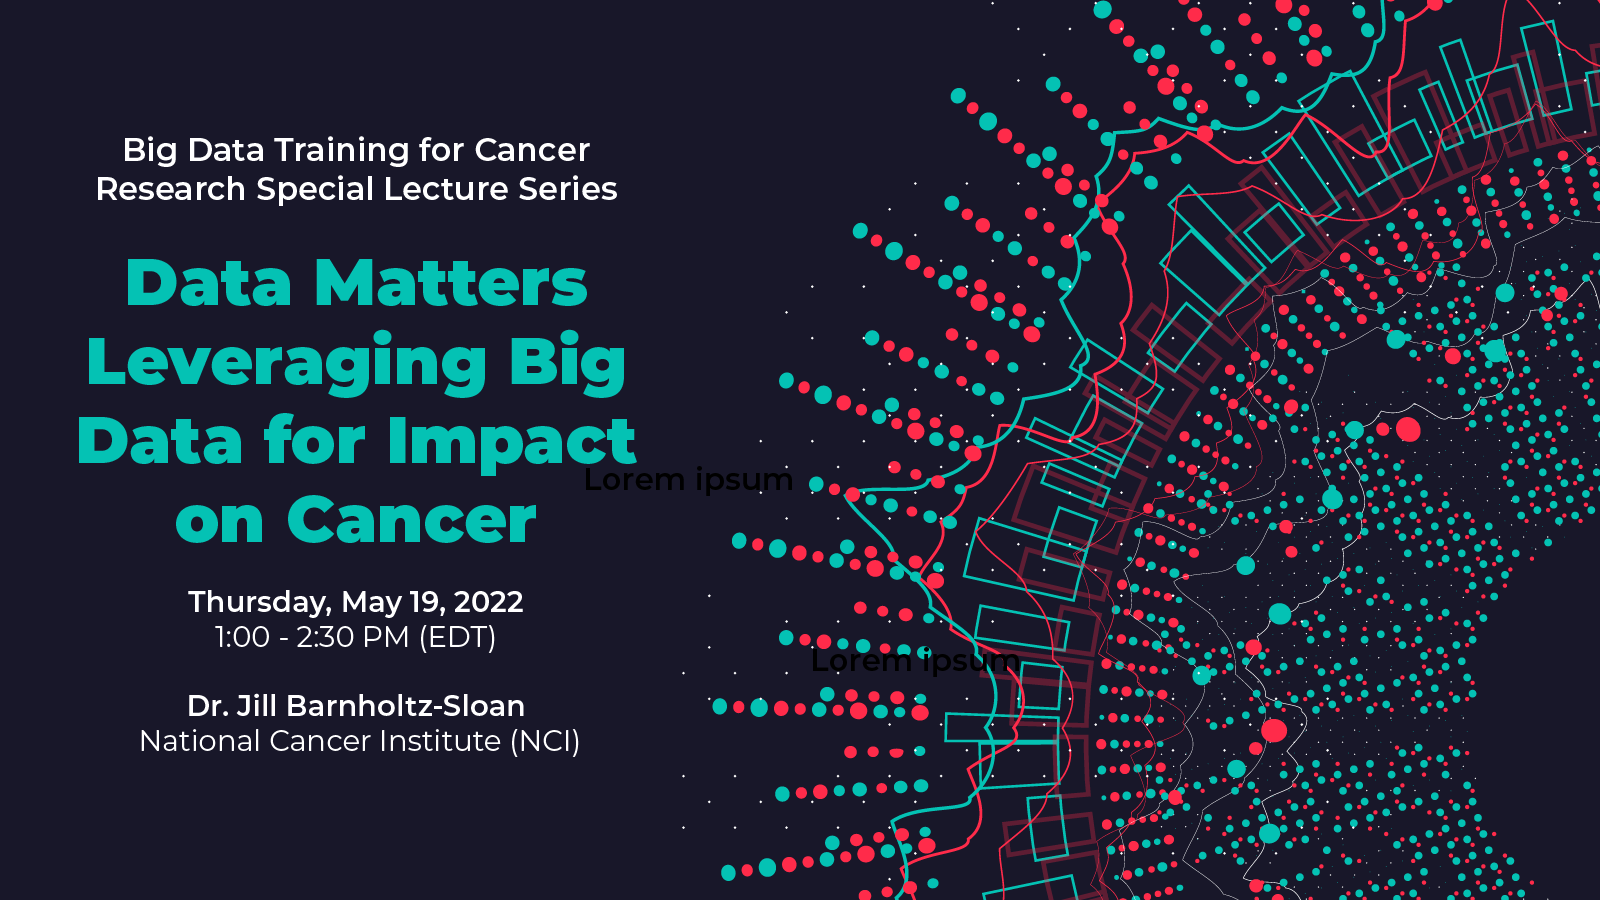 Big Data Training for Cancer Research Special Lecture Series- Data Matters Leveraging Big Data for Impact on Cance